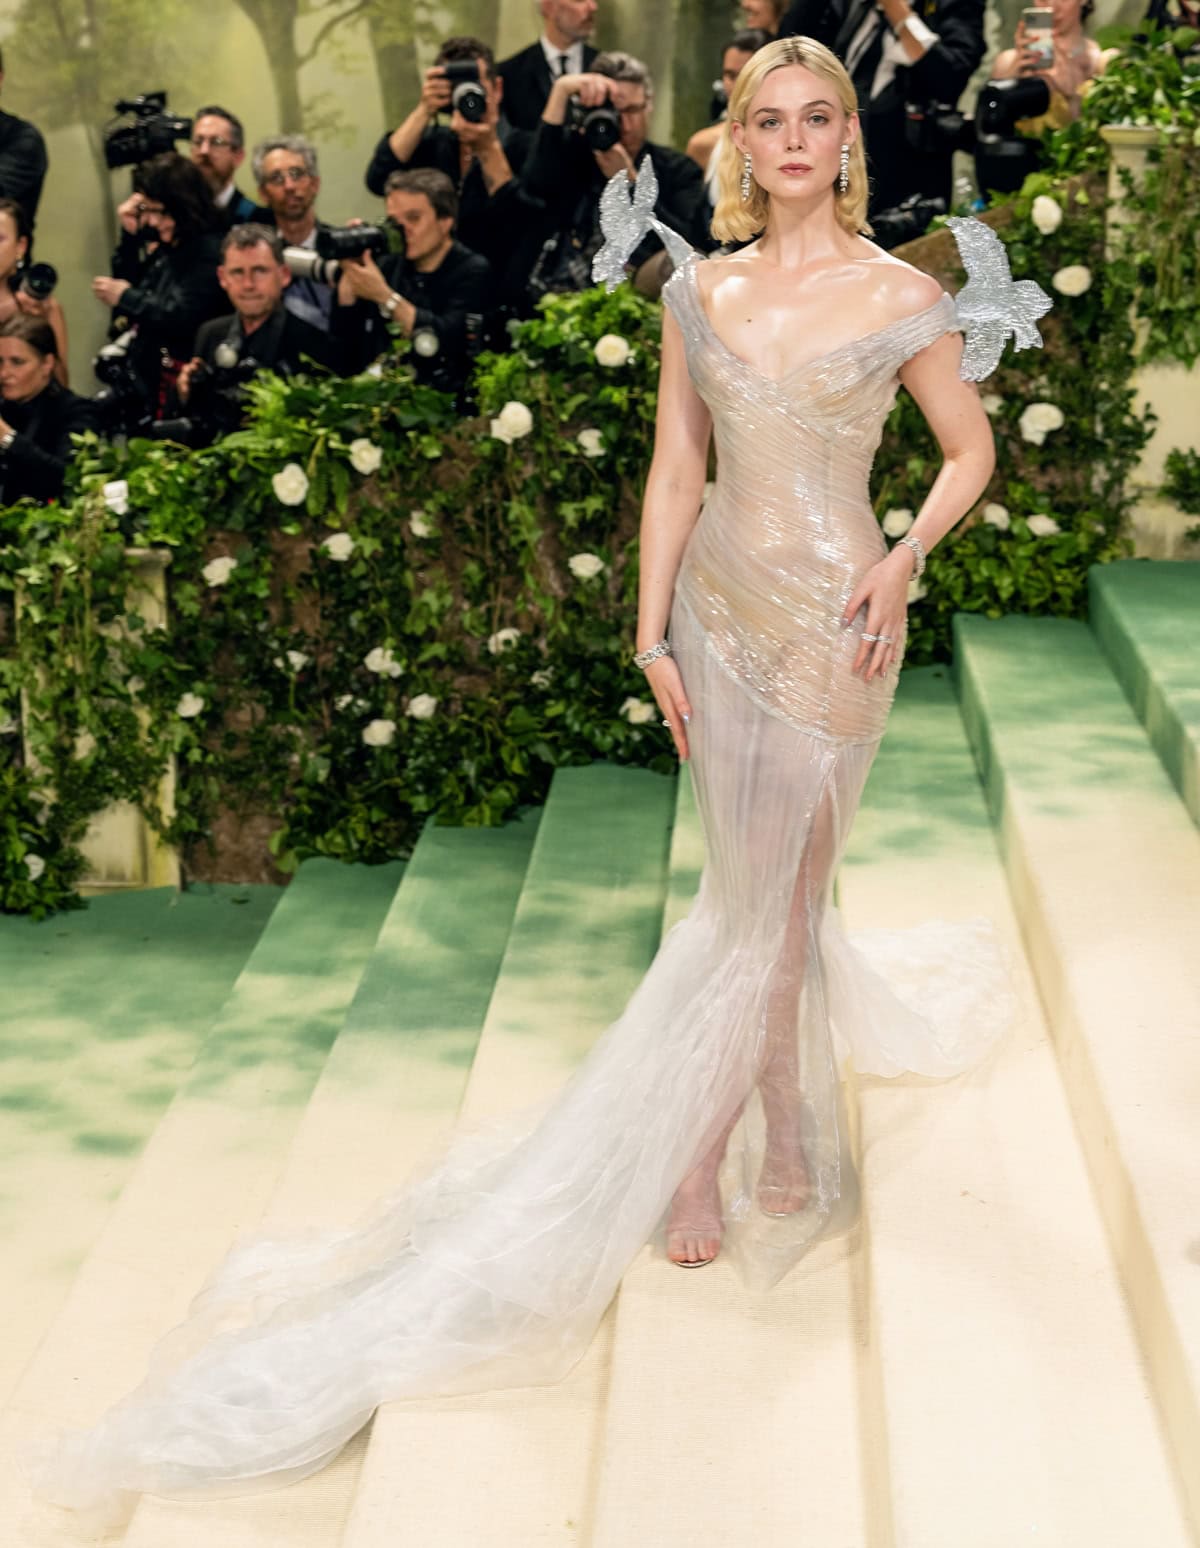 The intricate detailing of Elle Fanning's gown, inspired by J.G. Ballard’s 'The Garden of Time', features shimmering tulle and crystal 'birds' that add a whimsical, ethereal touch to her ensemble